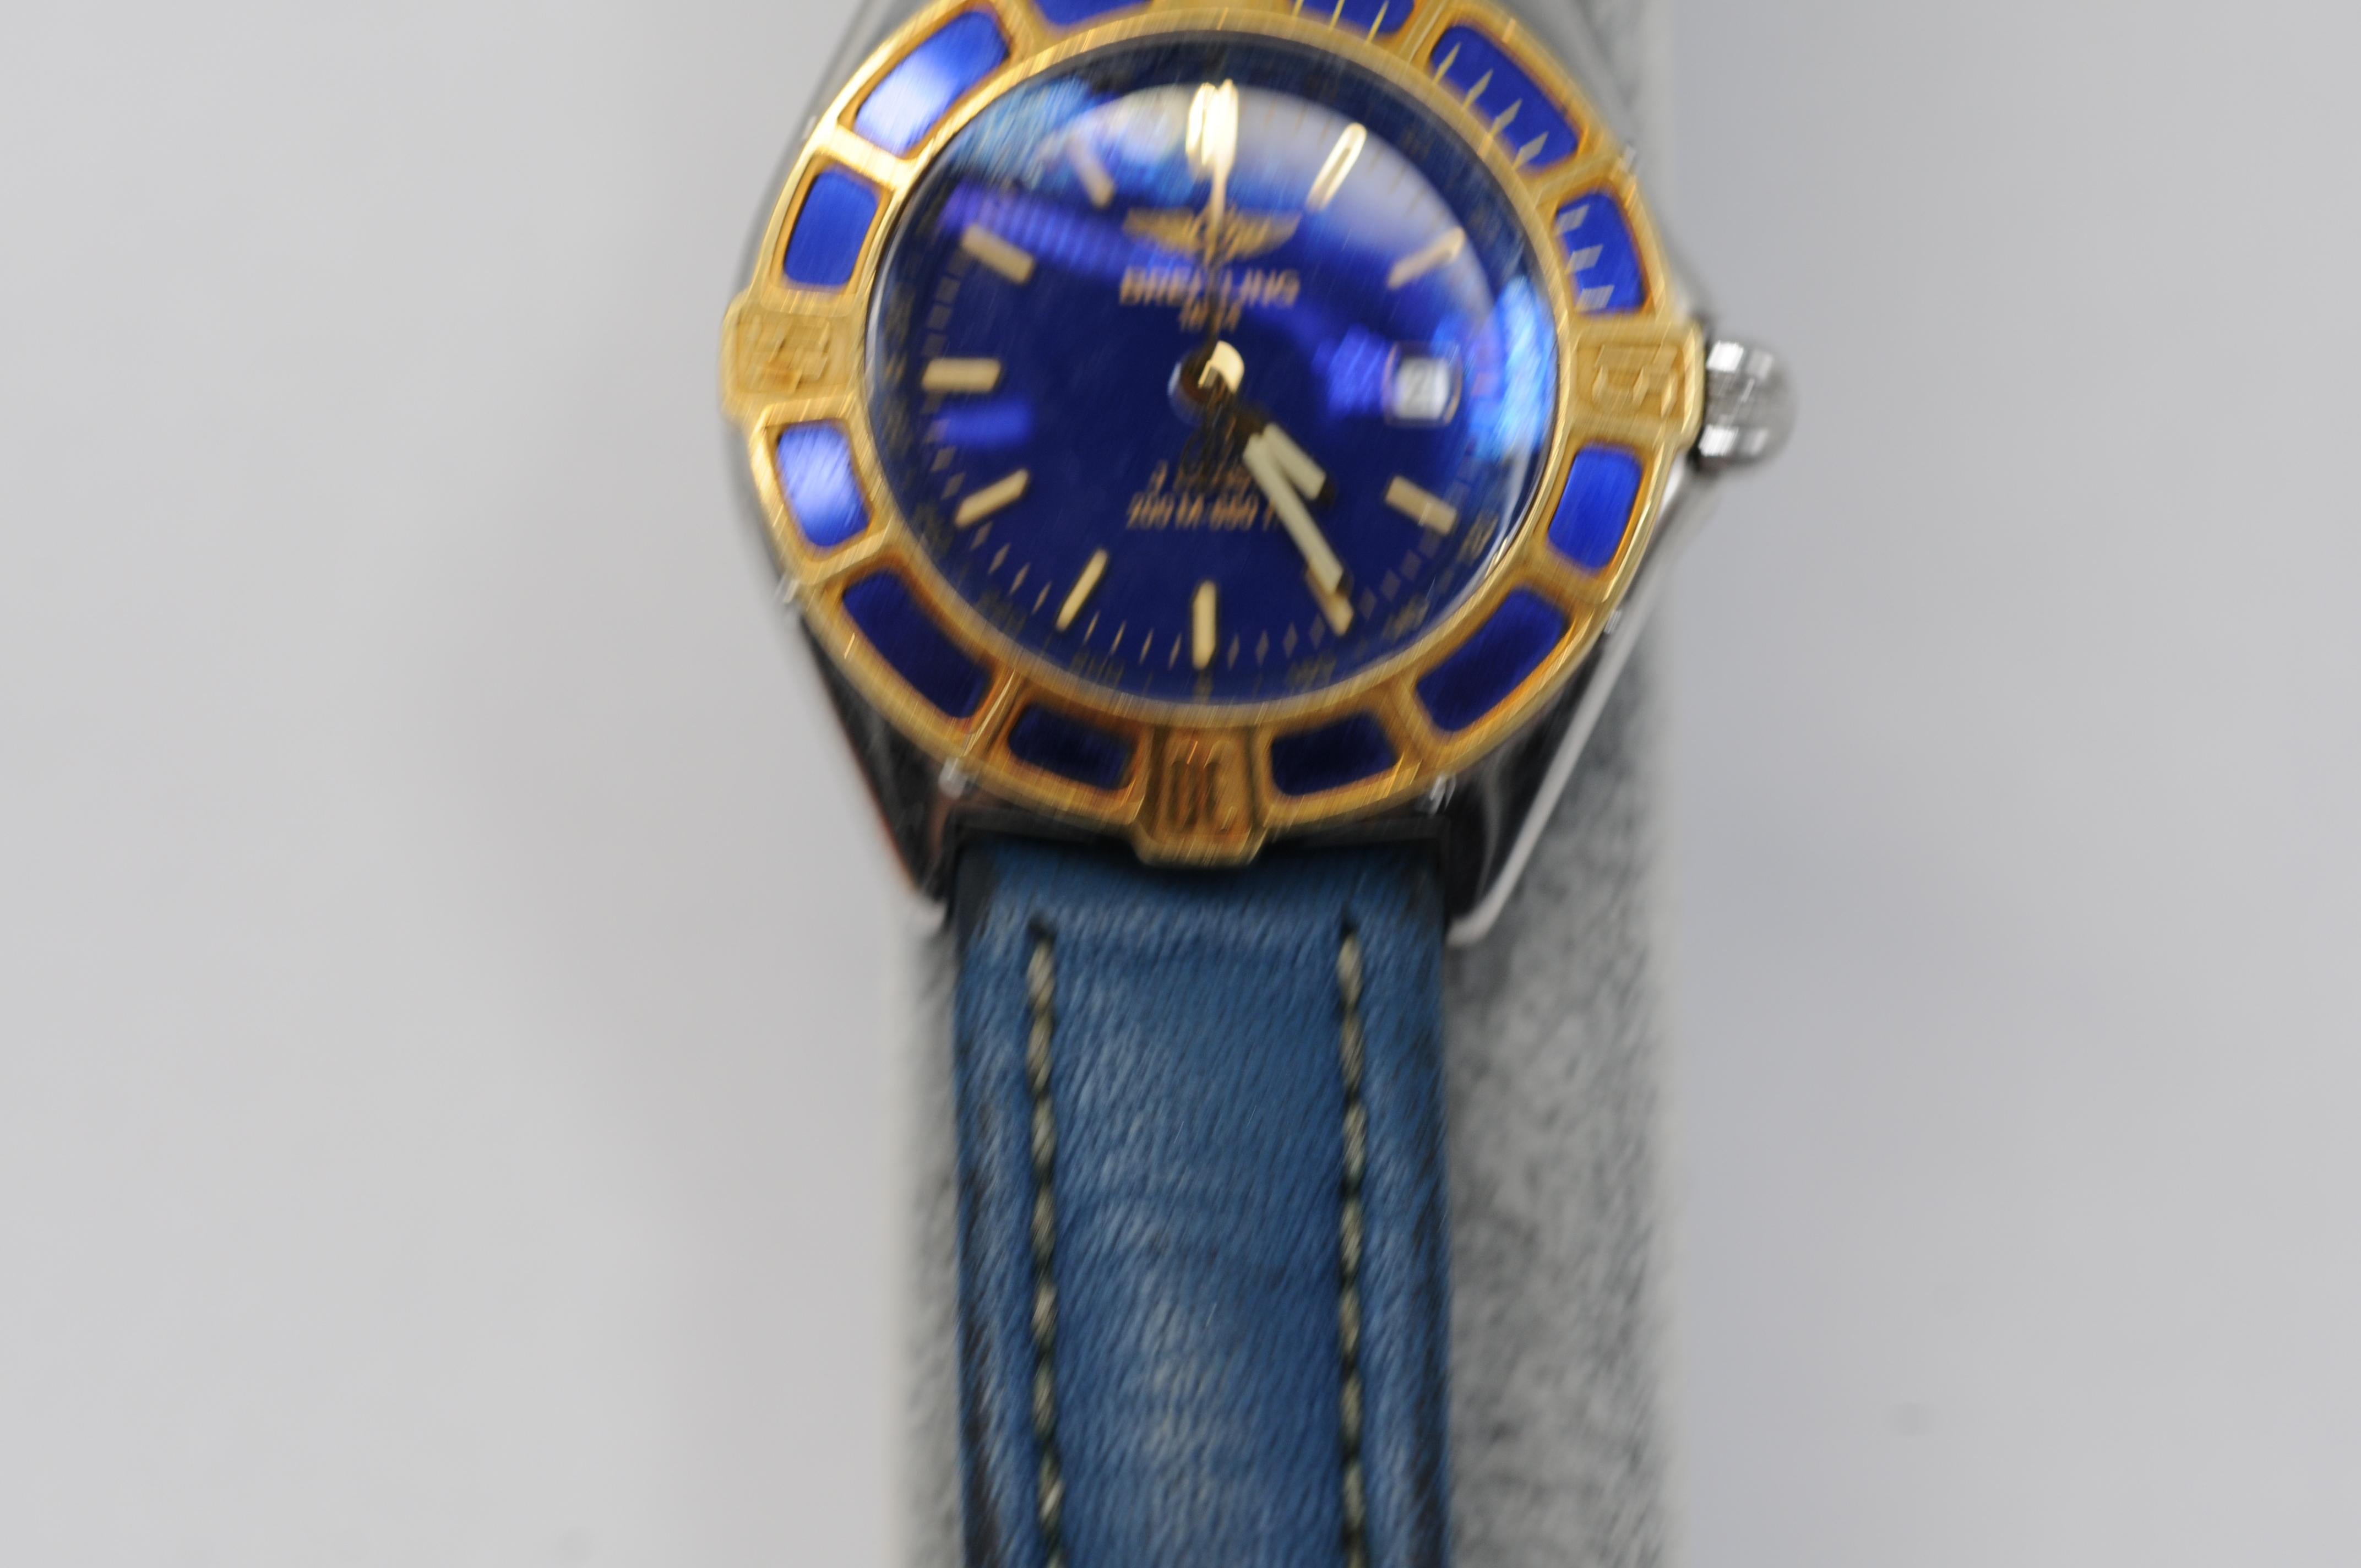 Breitling Lady J D52065 with a deep blue leather strap For Sale 5